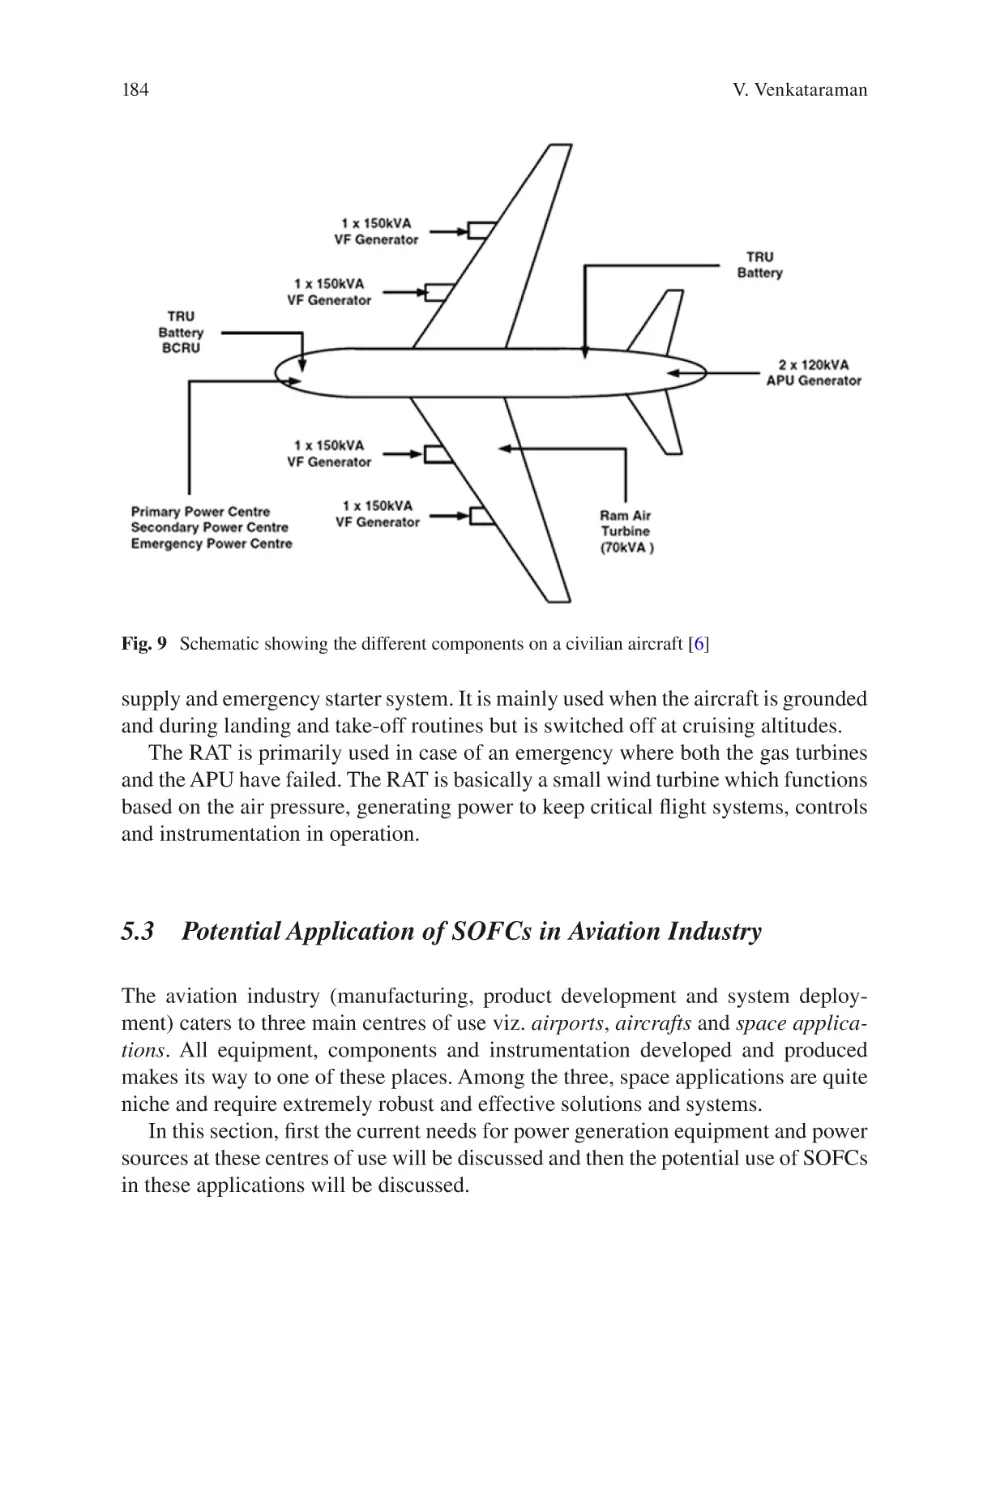 5.3 Potential Application of SOFCs in Aviation Industry